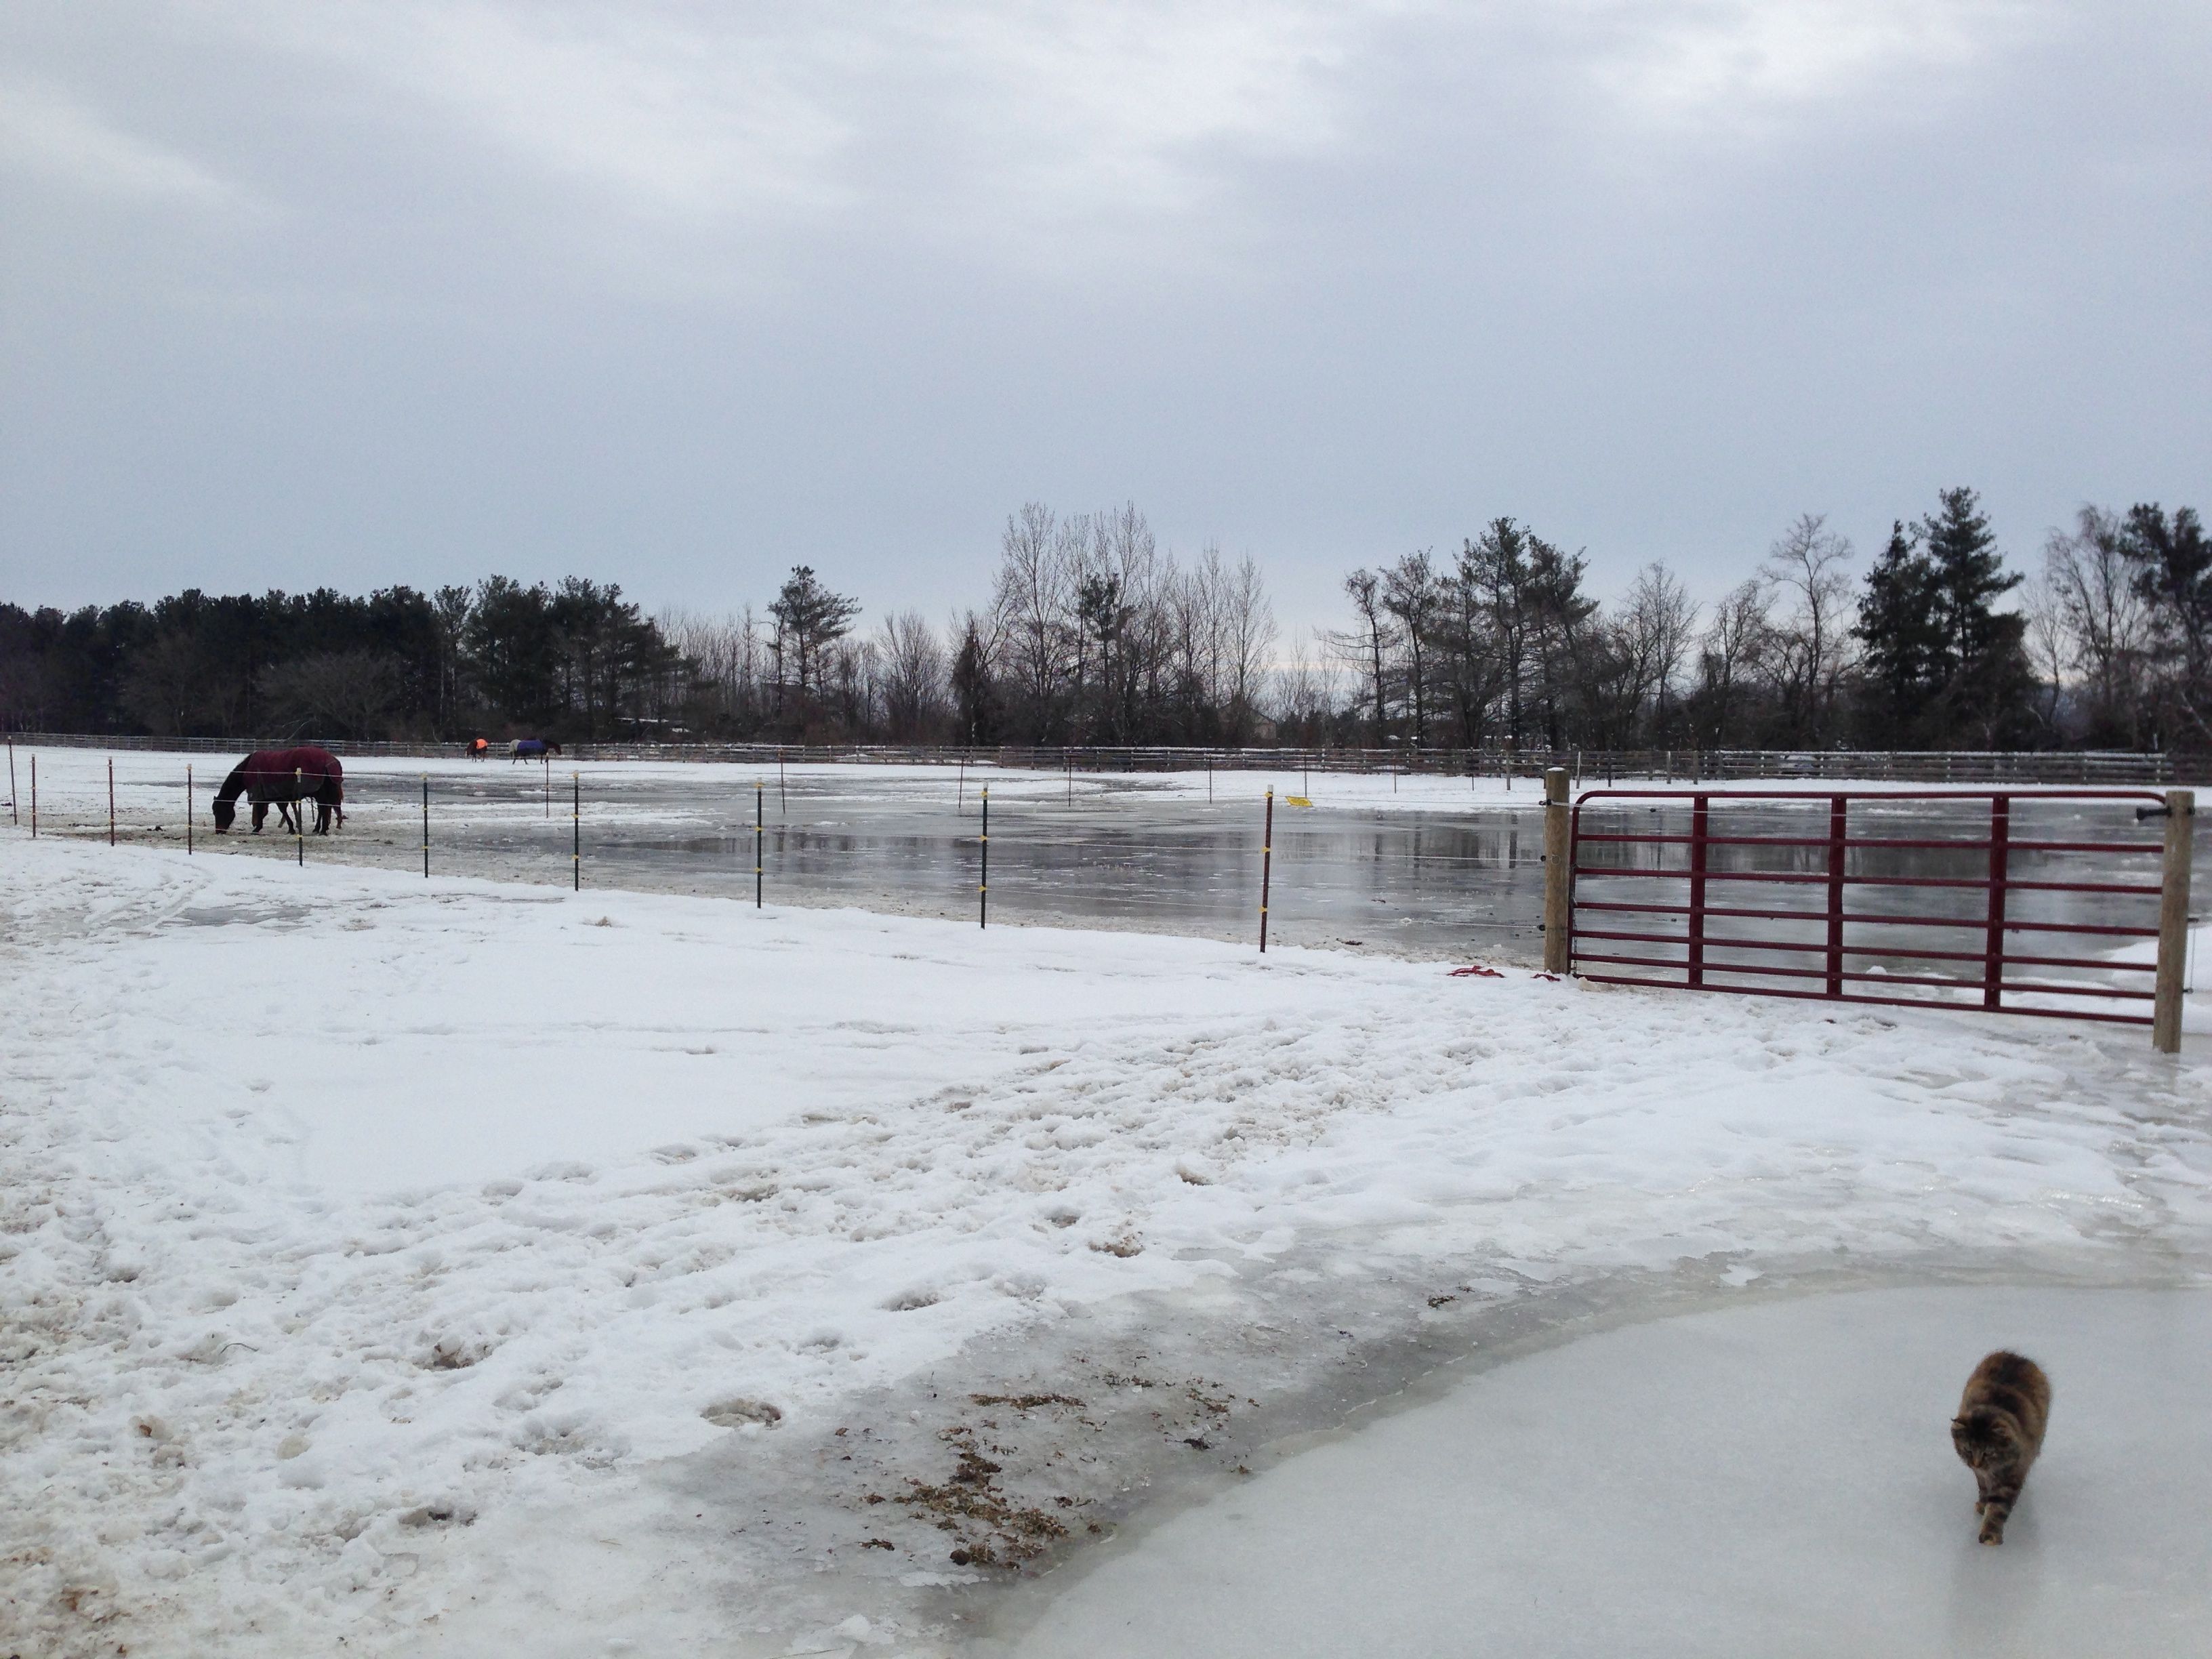 Horses turned out in ice paddock